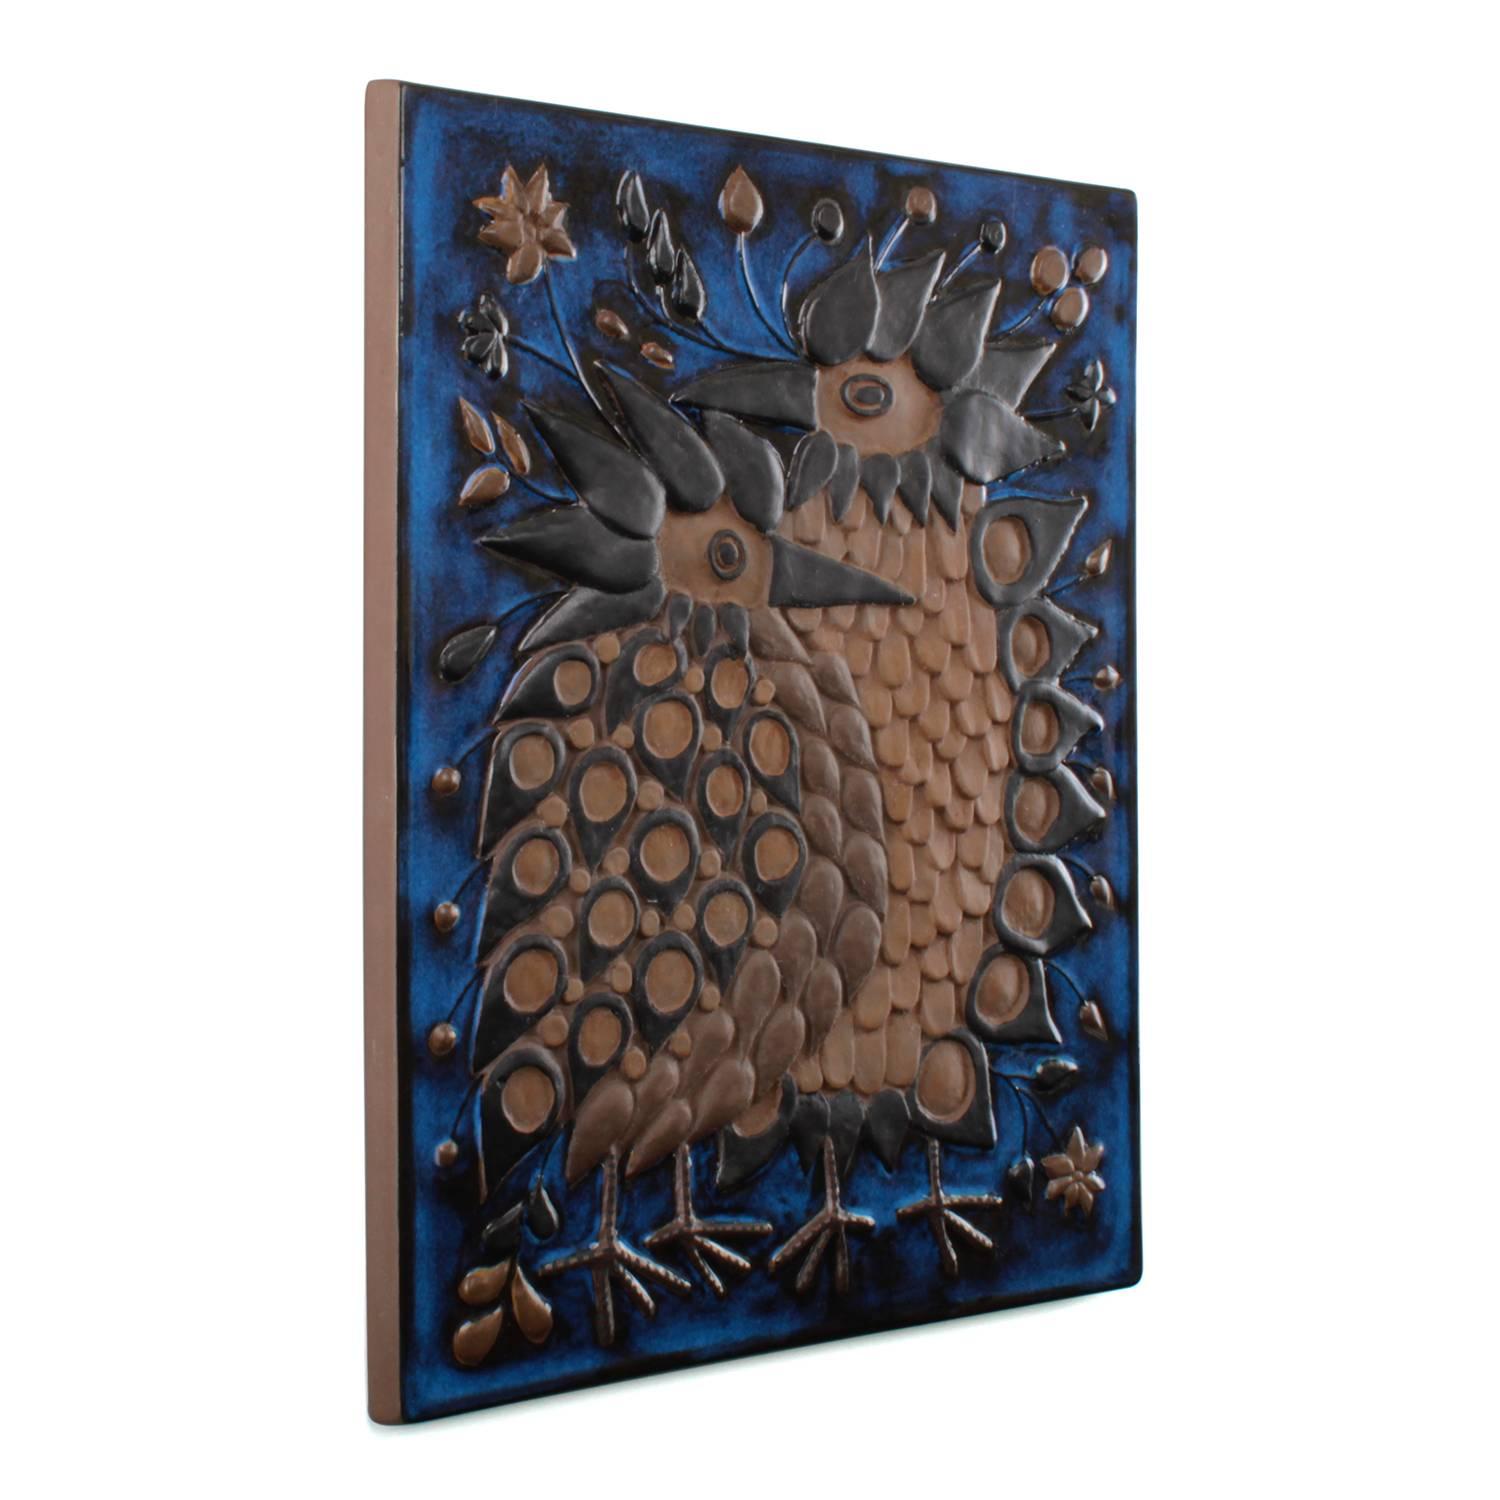 Wall Relief (no. 2866) - by Beth Breyen in the 1960s, produced by Aluminia/Royal Copenhagen - charming wall piece with two birds.

A stunning wall piece - made in terracotta with blue glaze. Featuring two birds with fuzzy feathers, one smaller